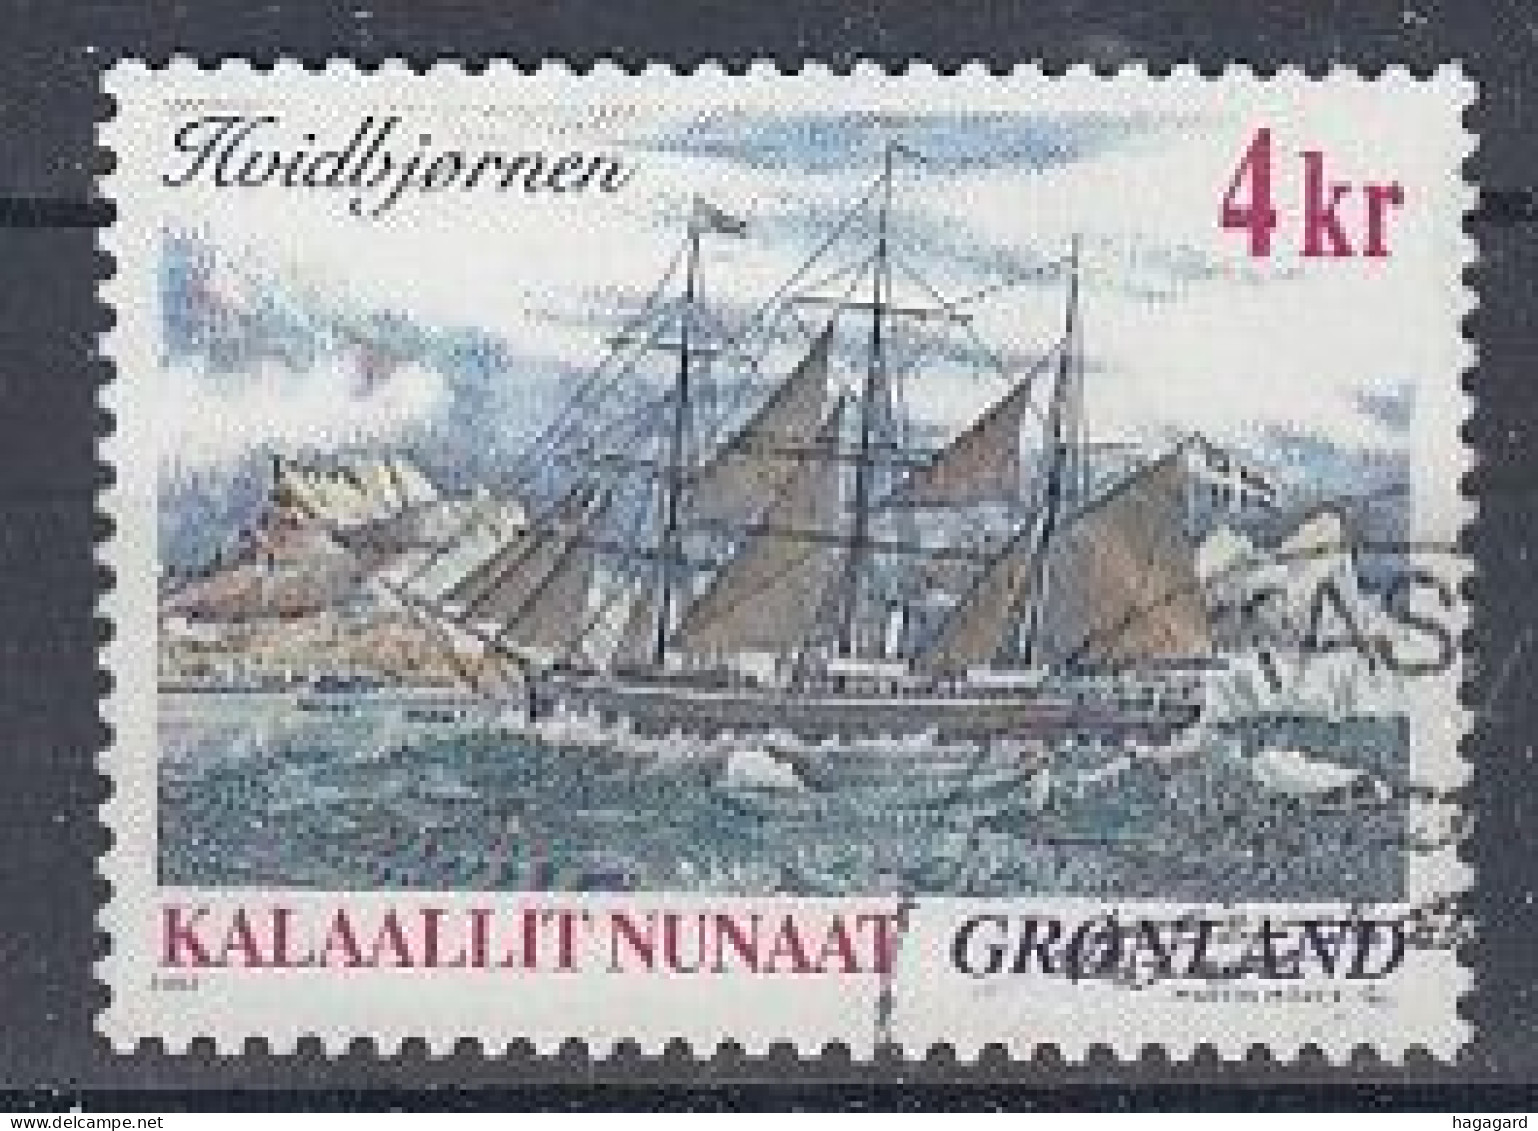 Greenland 2002. Sailship. Michel 382. Used - Used Stamps